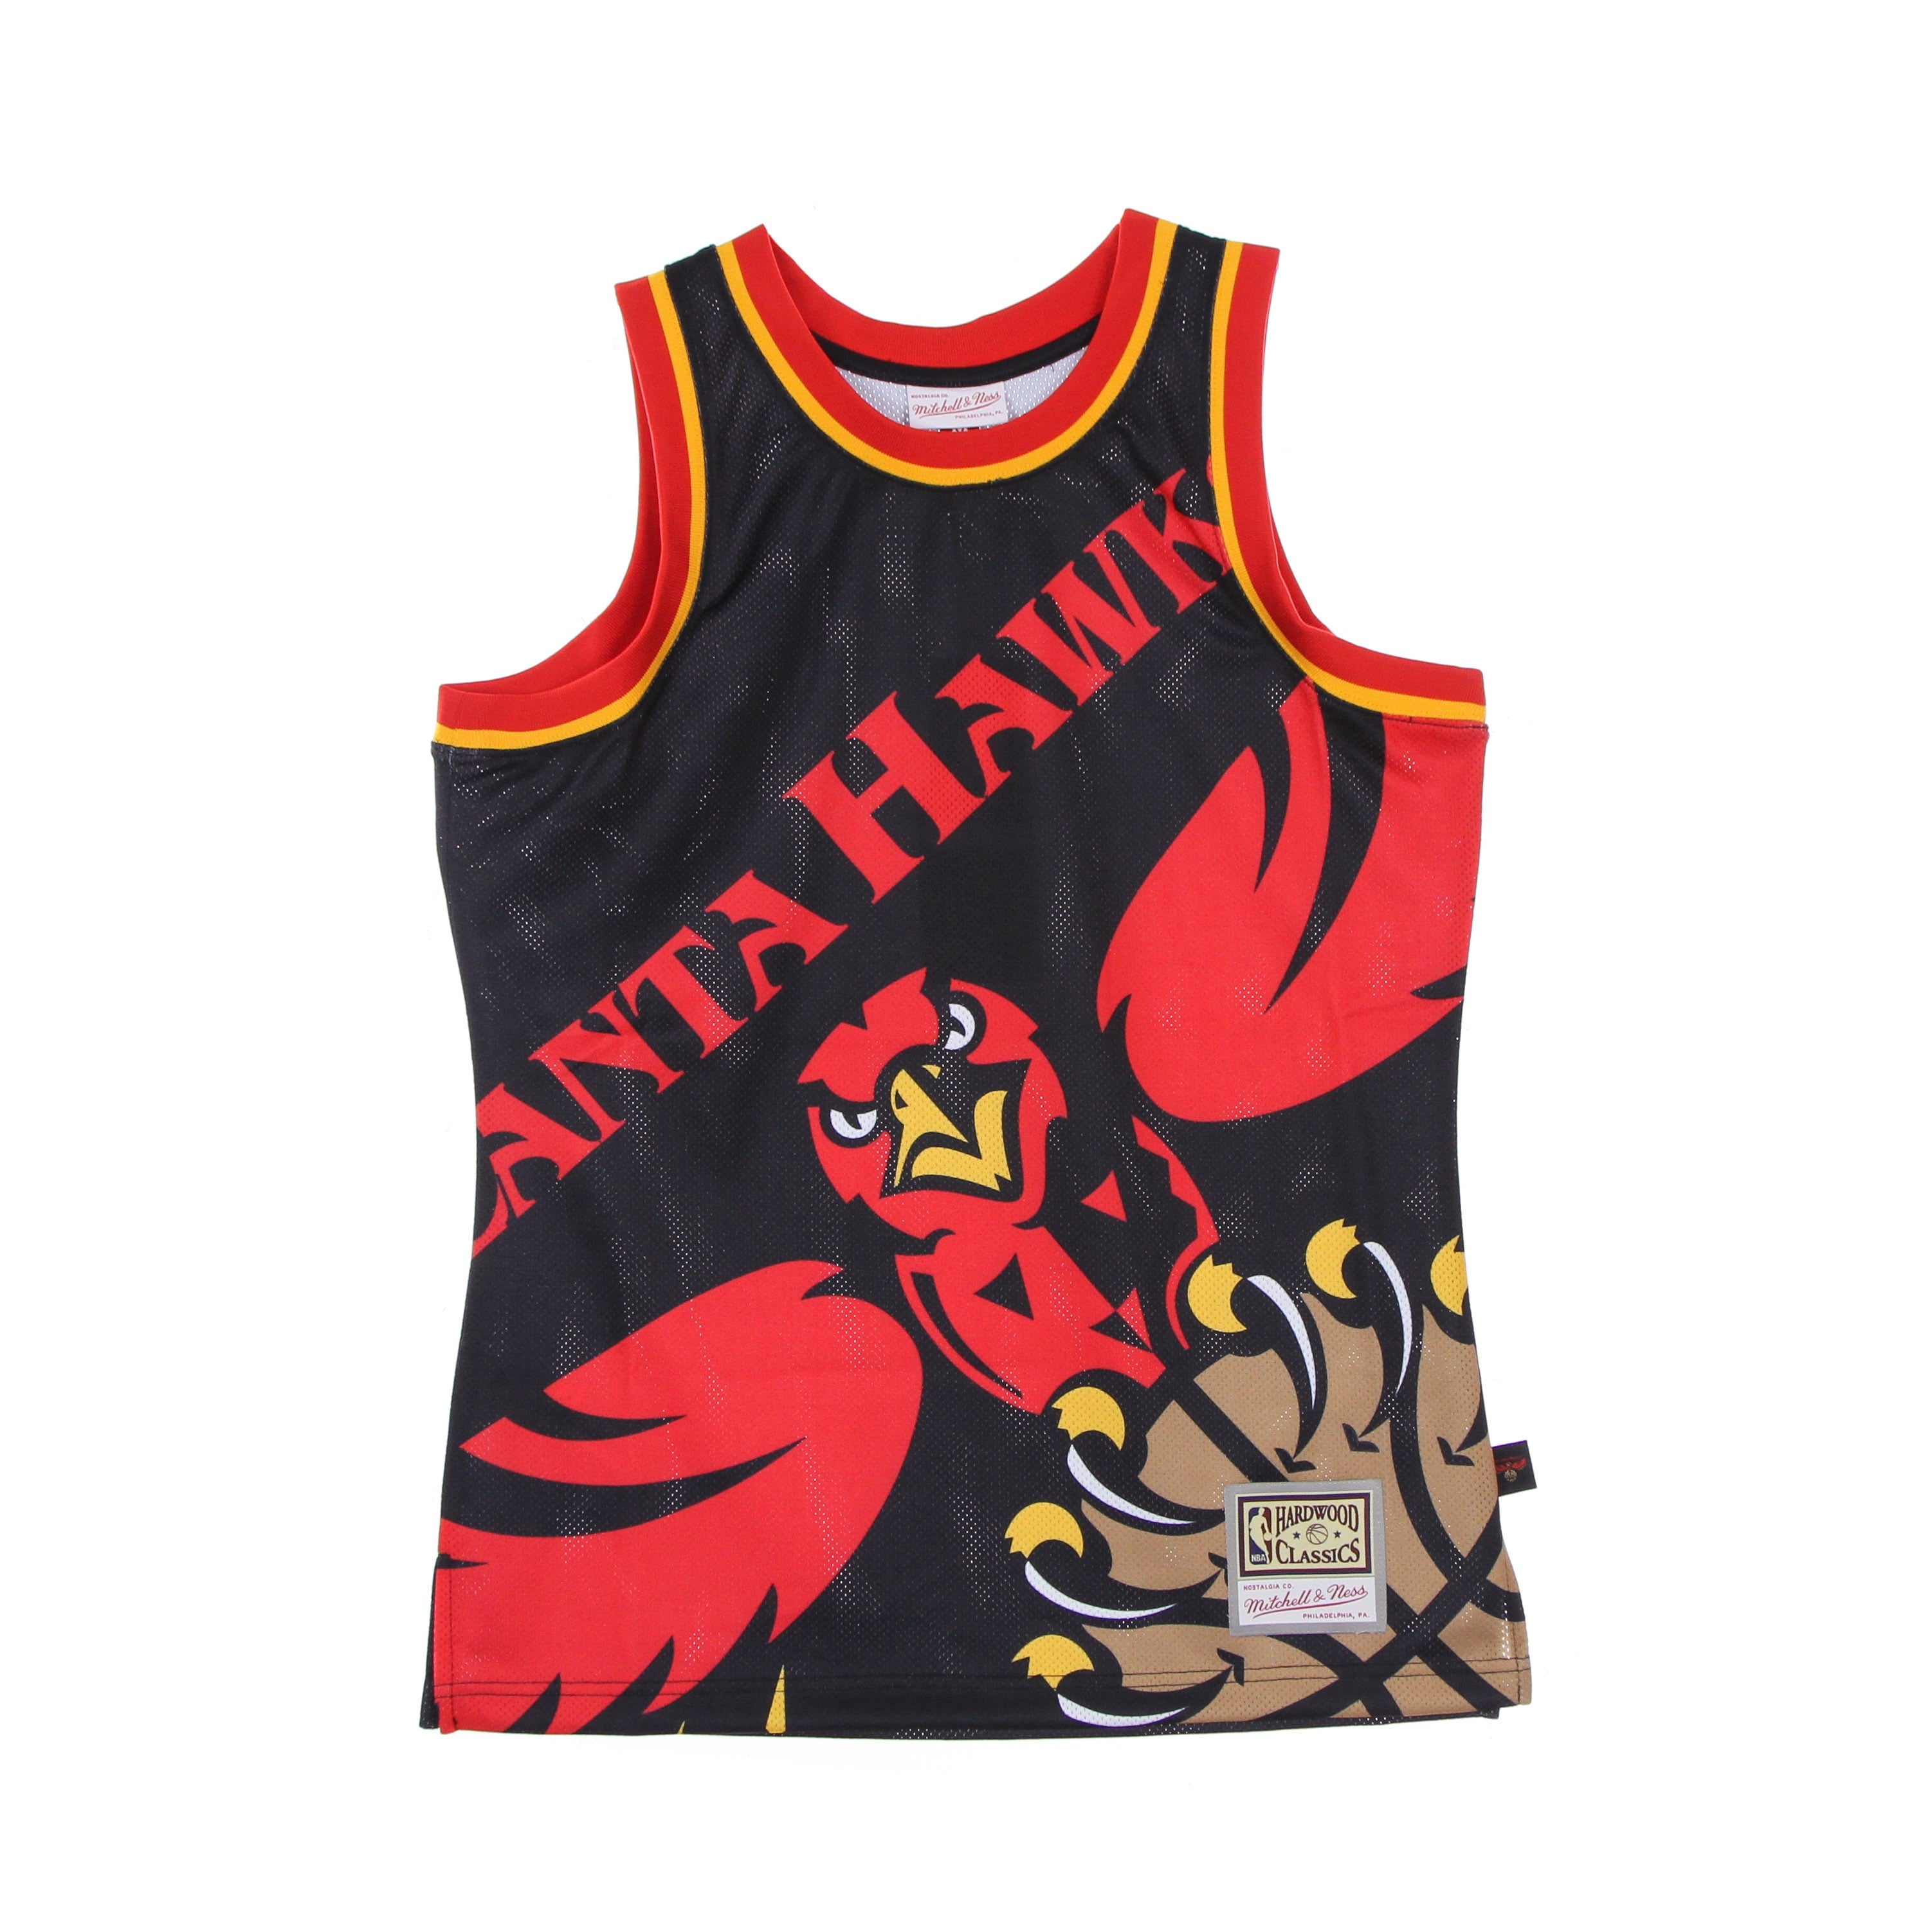 Mitchell & Ness, Canotta Tipo Basket Uomo Nba Big Face Blown Out Fashion Jersey Hardwood Classics Atlhaw, Black/original Team Colors